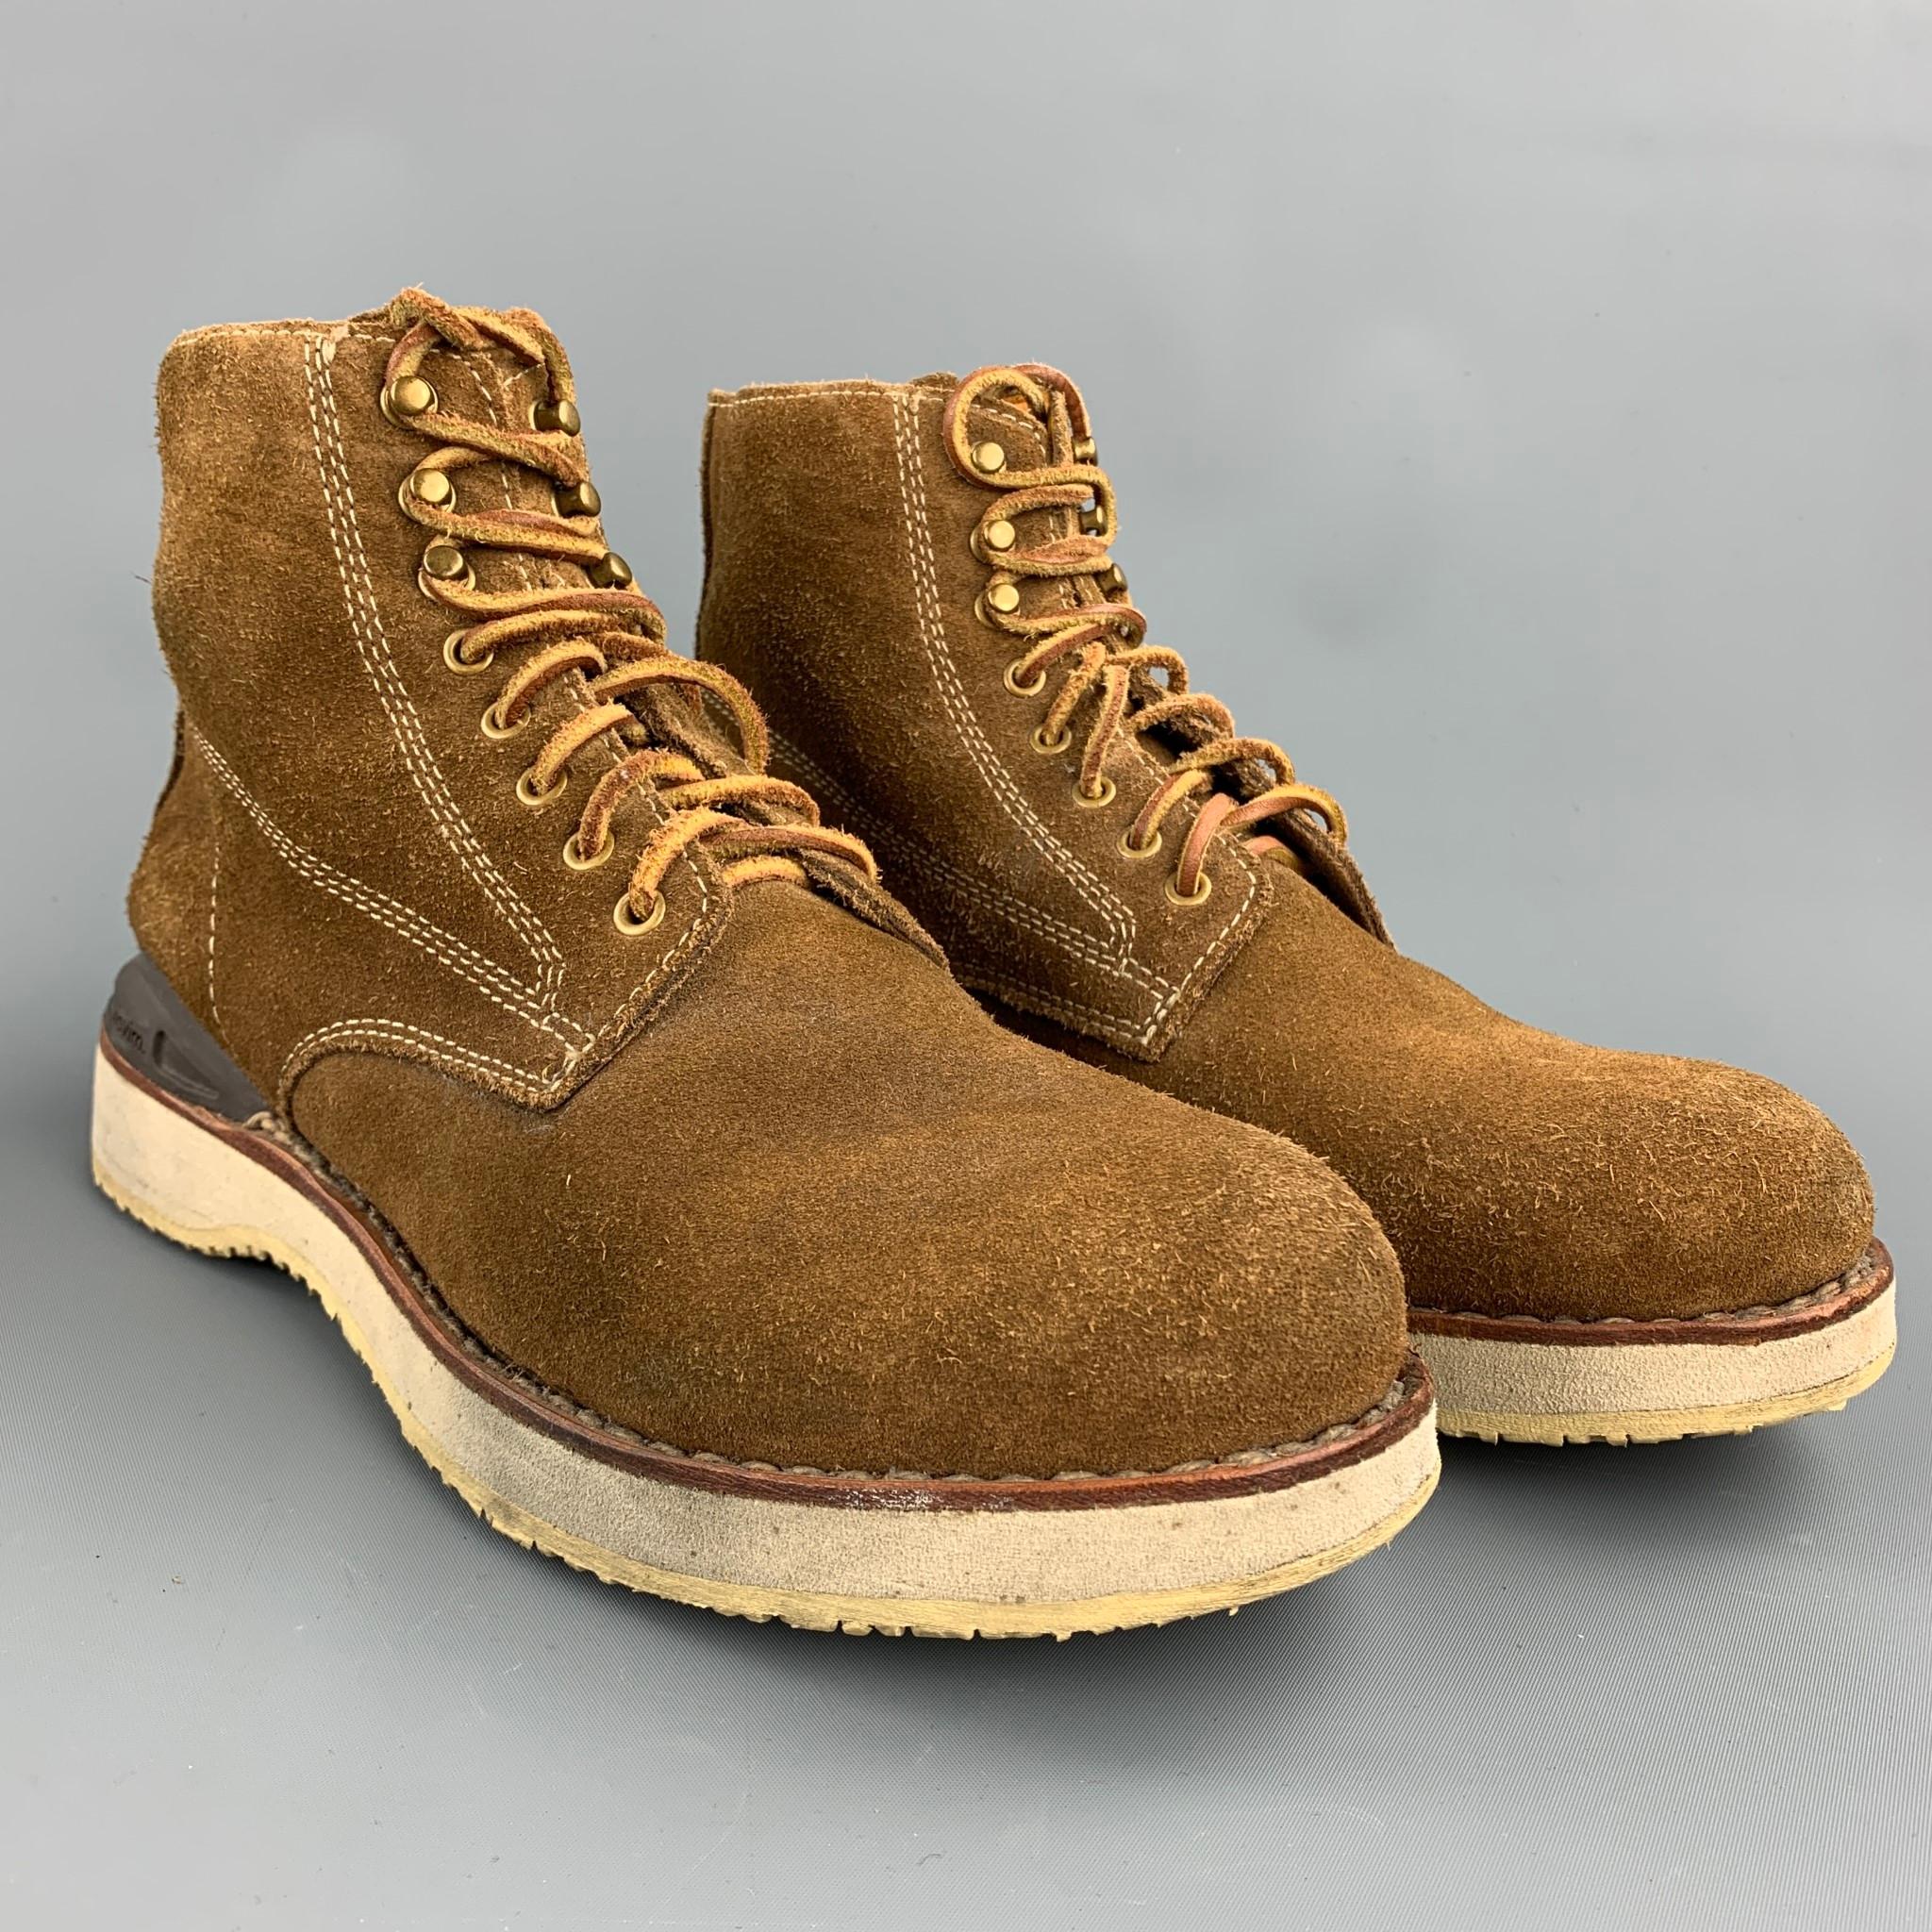 VISVIM boots comes in a brown textured suede featuring a worker style, contrast stitching, crepe sole, and a lace up closure. Minor wear. As-Is.

Good Pre-Owned Condition.
Marked: US 10

Width: 4 in. 
Length: 11.5 in. 
Height: 6.5 in. 